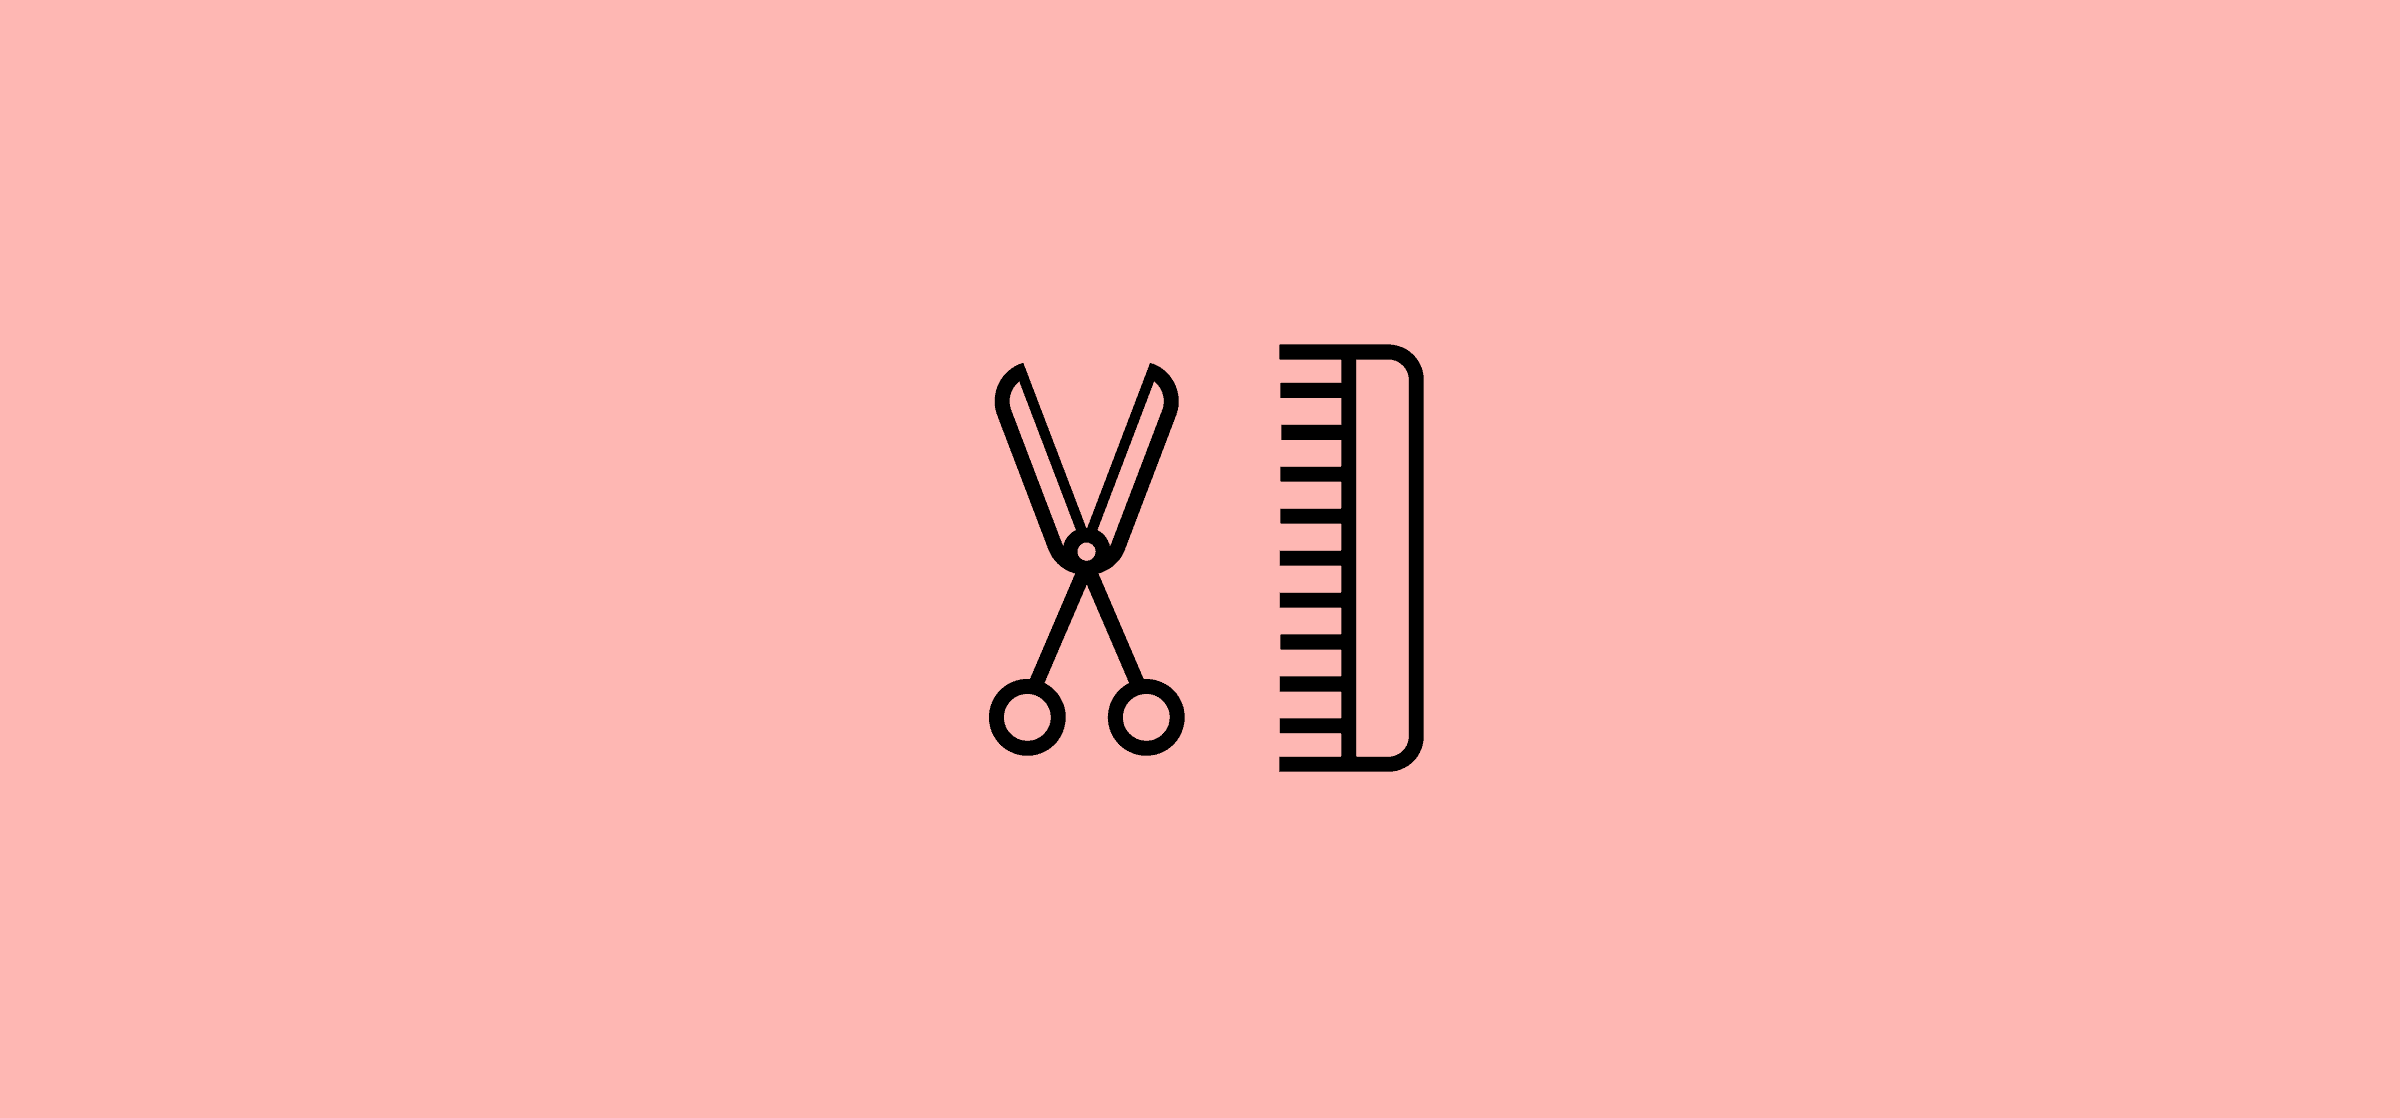 Scissors and a comb, representing backlog grooming